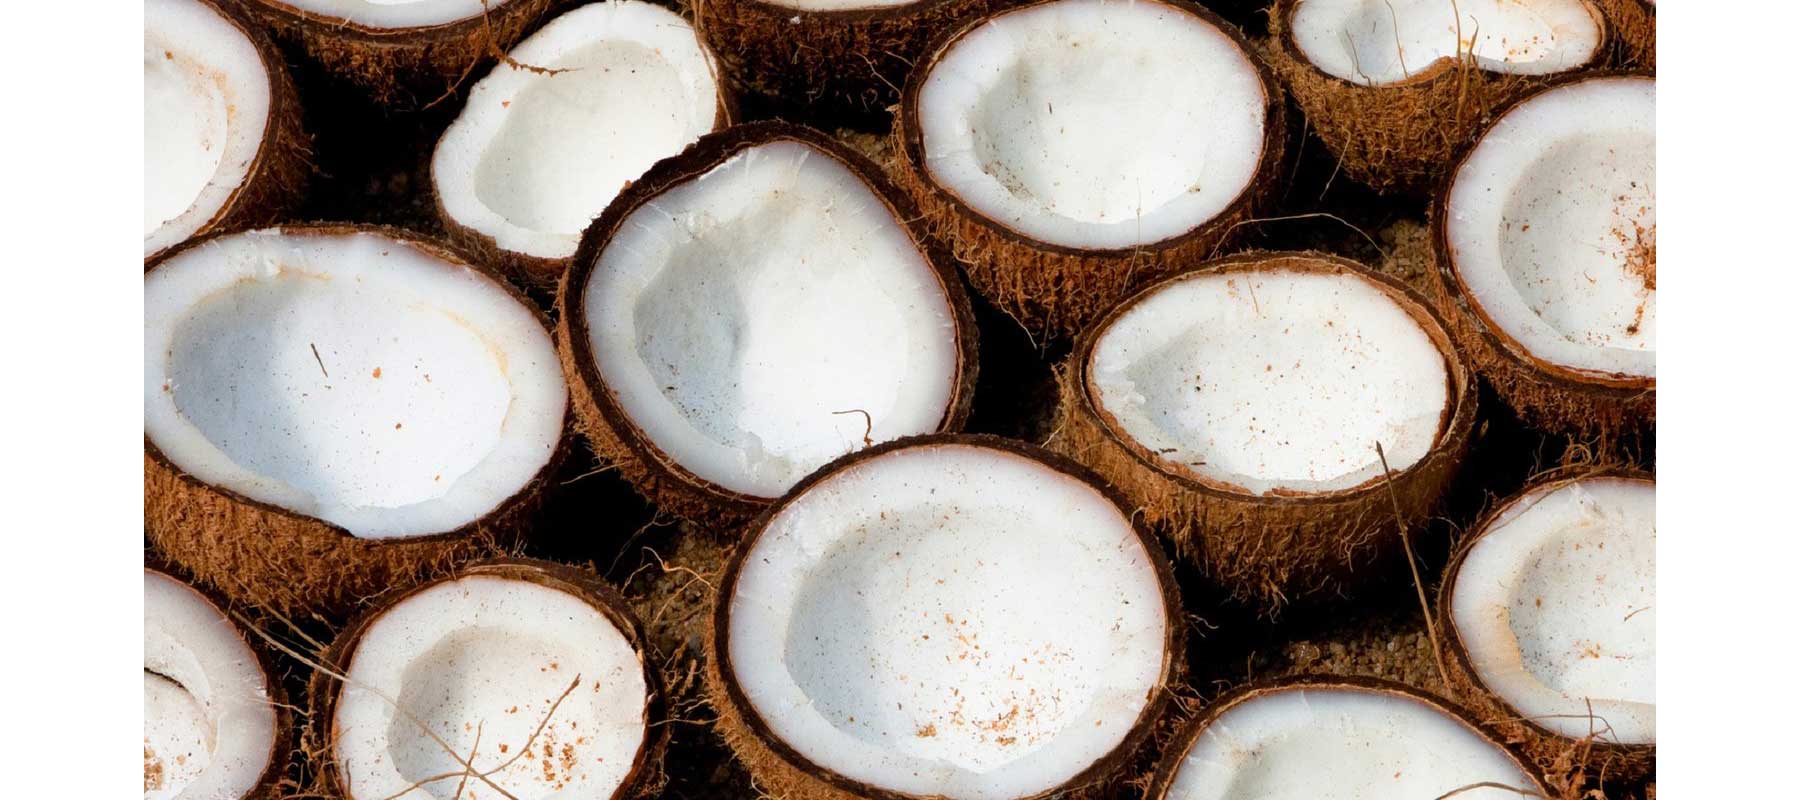 Can I Use Coconut Oil As a Lubricant?